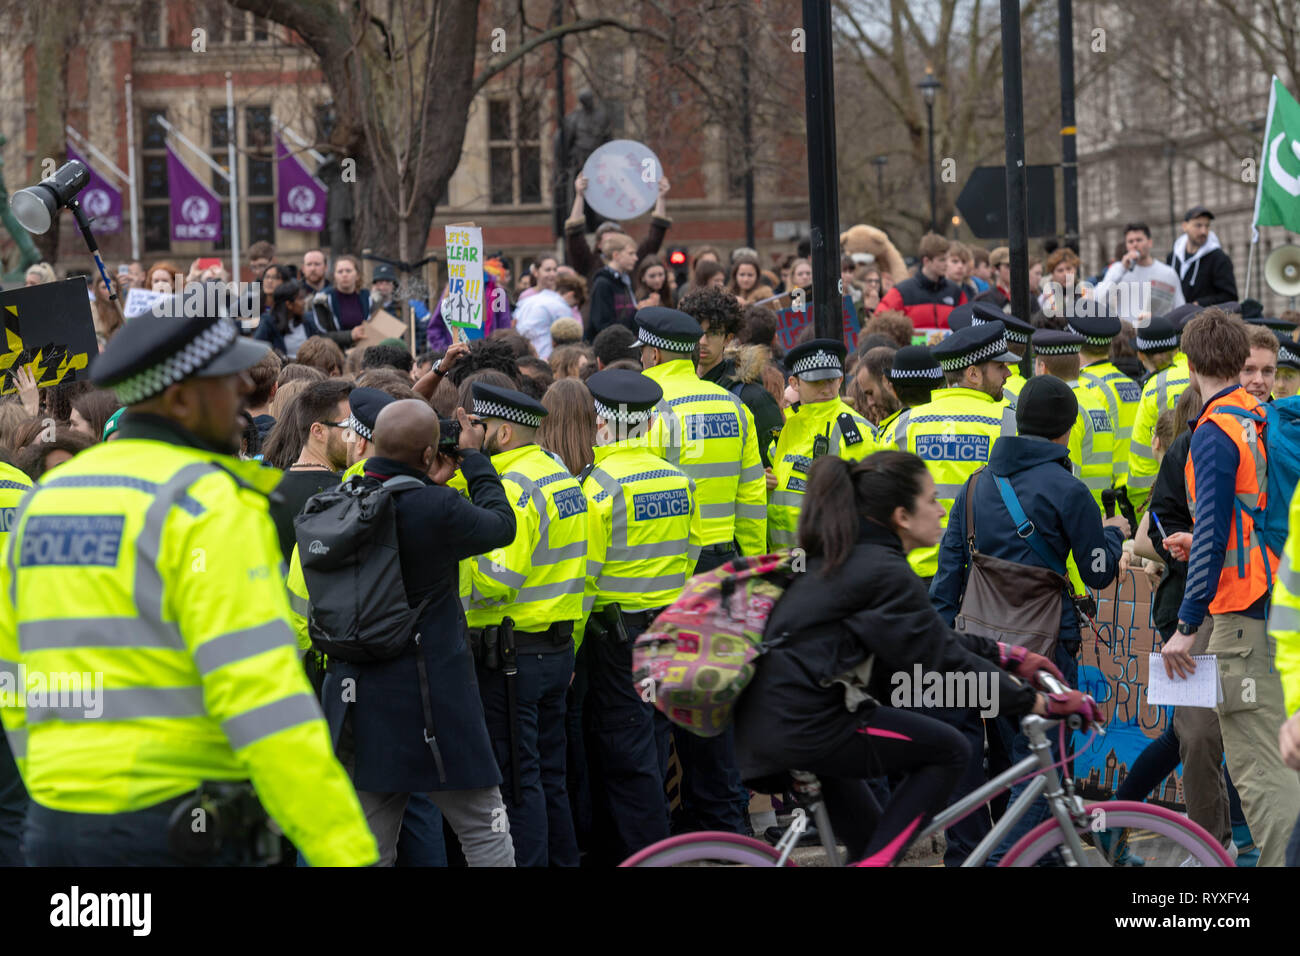 London 15th March 2018 Mass student climate change protest in central London  Police try to contain the protesters Credit Ian Davidson/Alamy Live News Stock Photo